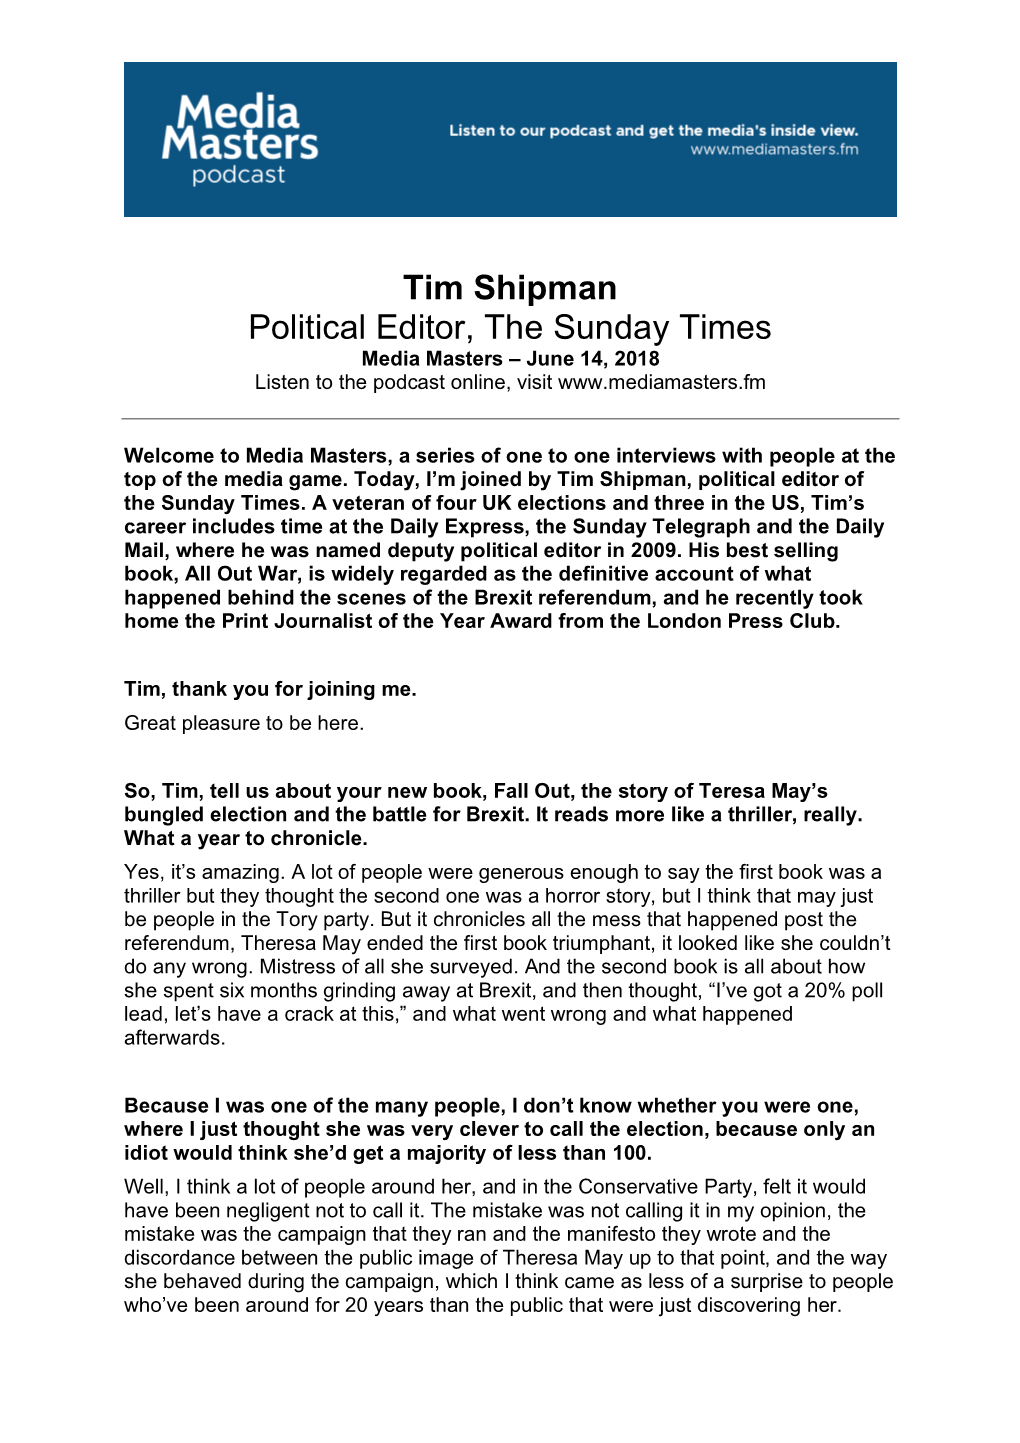 Tim Shipman Political Editor, the Sunday Times Media Masters – June 14, 2018 Listen to the Podcast Online, Visit